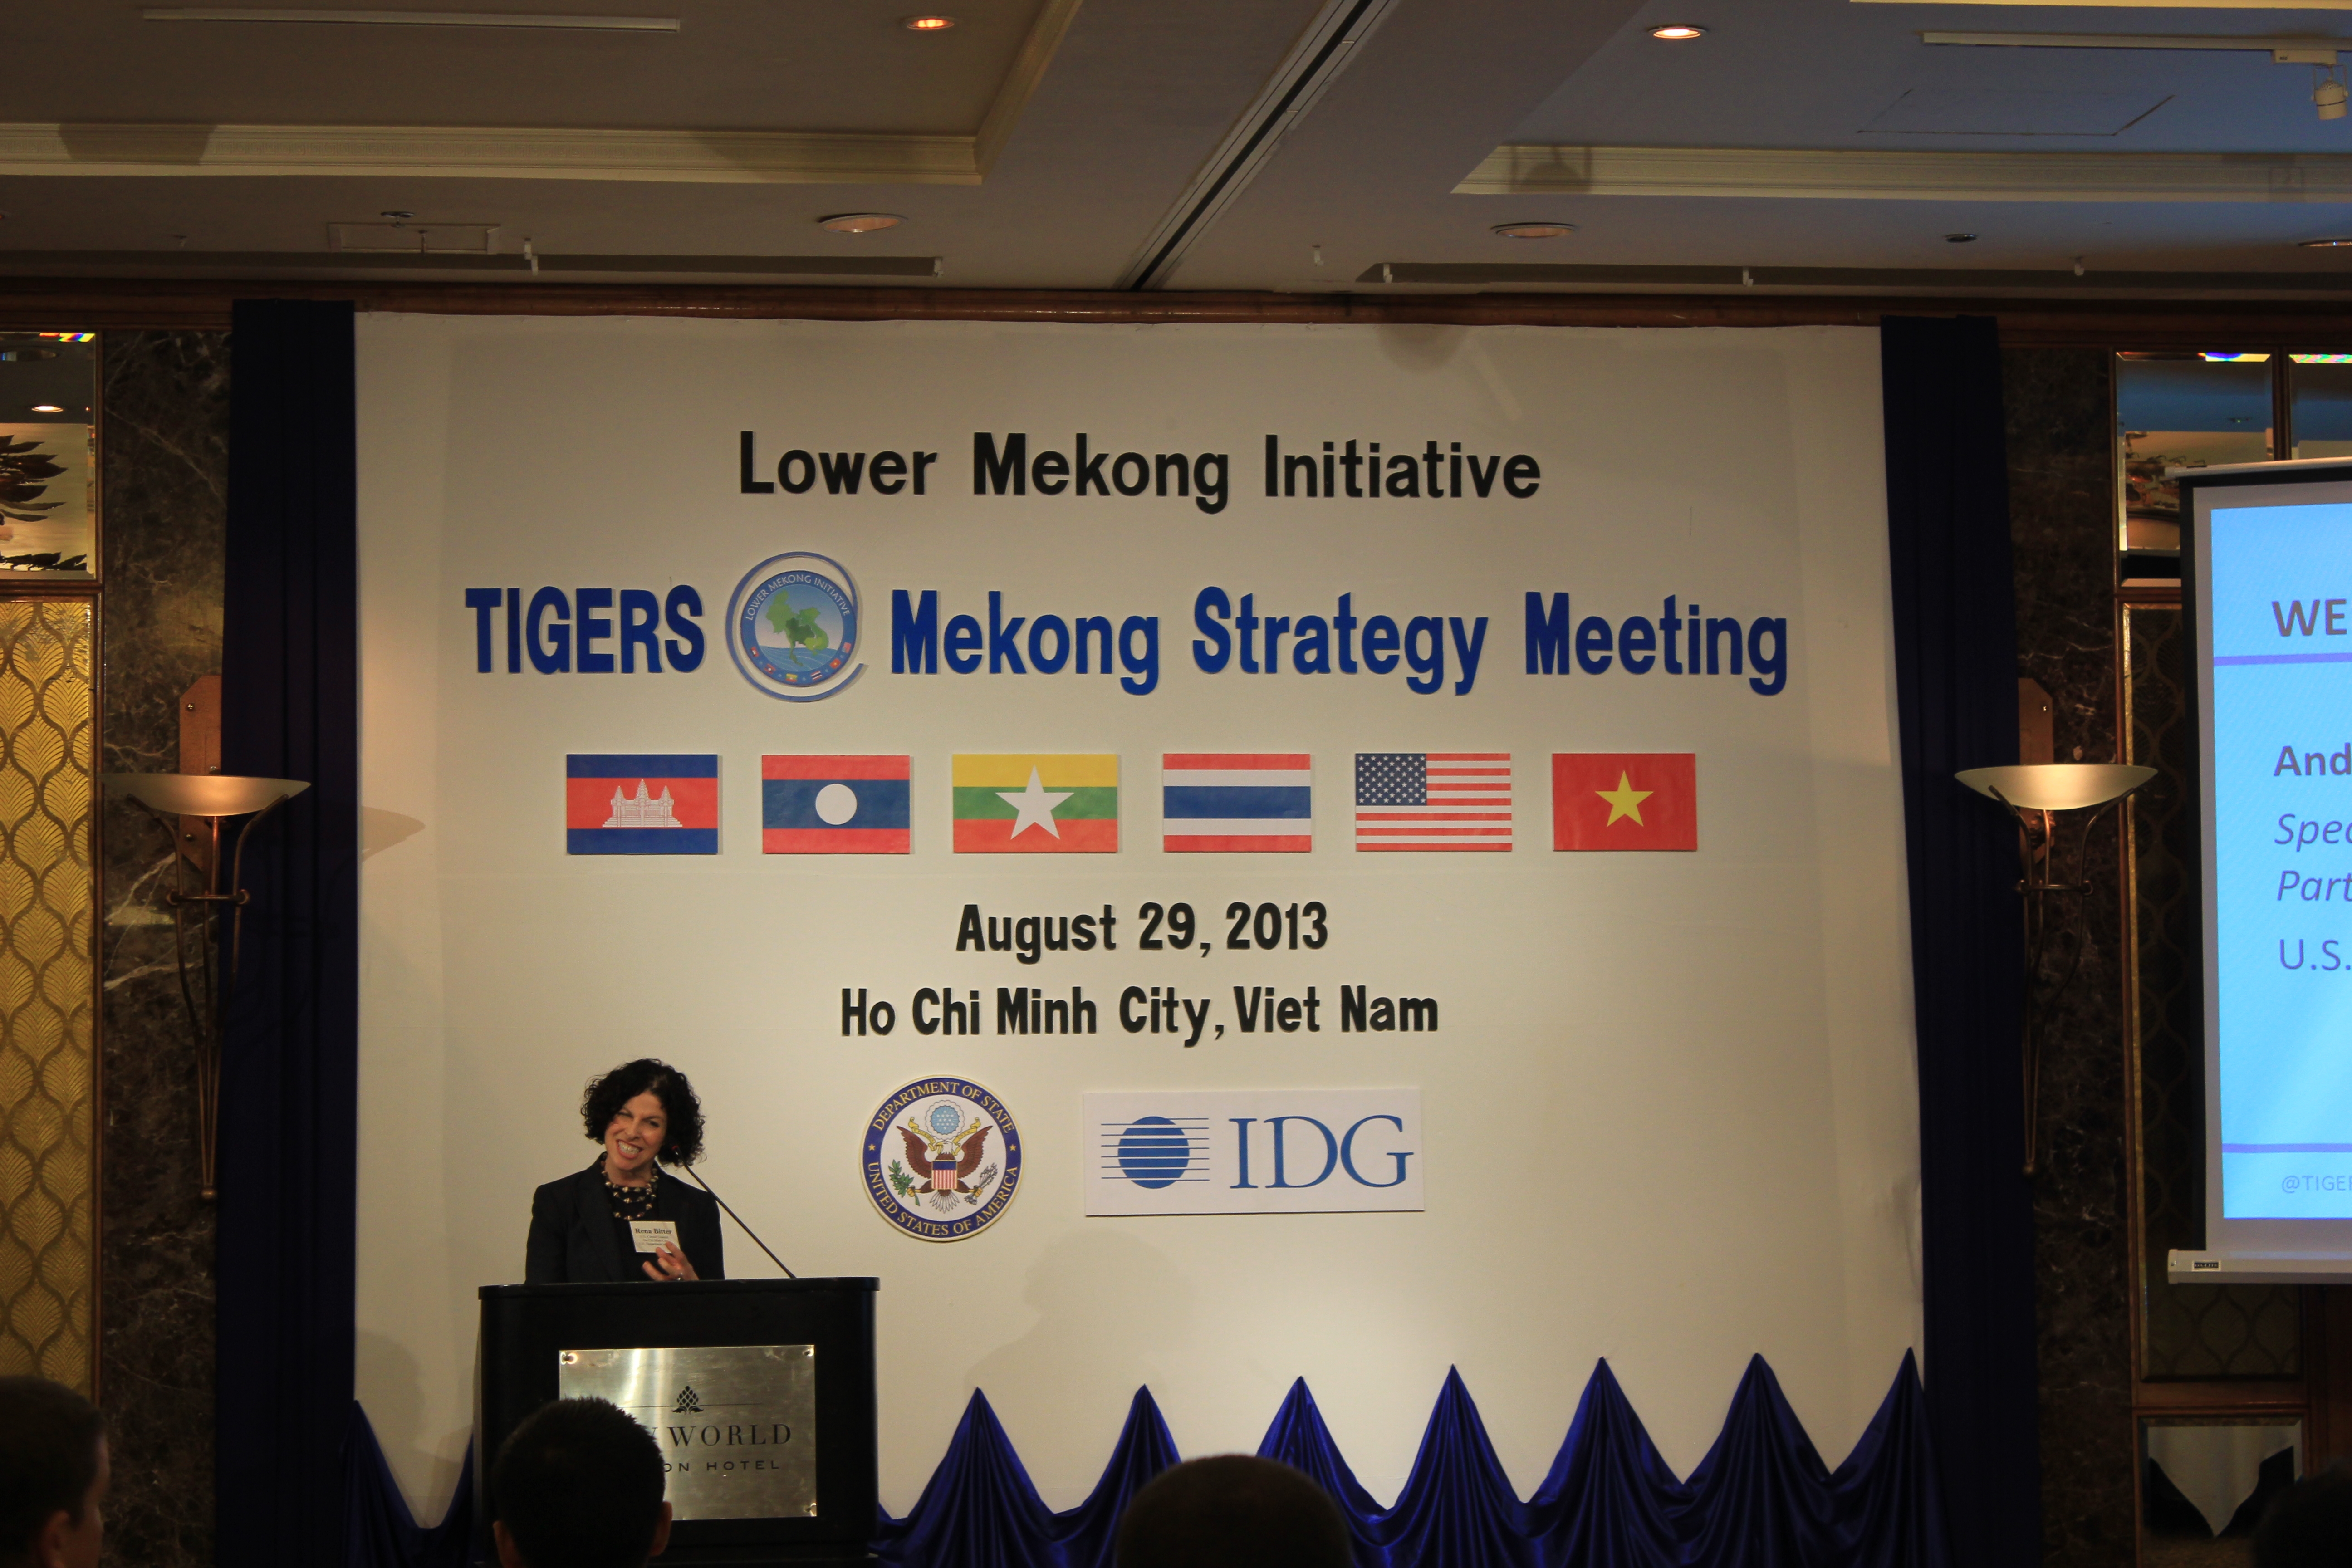 TIGERS@Mekong strategy meeting held in HCMC